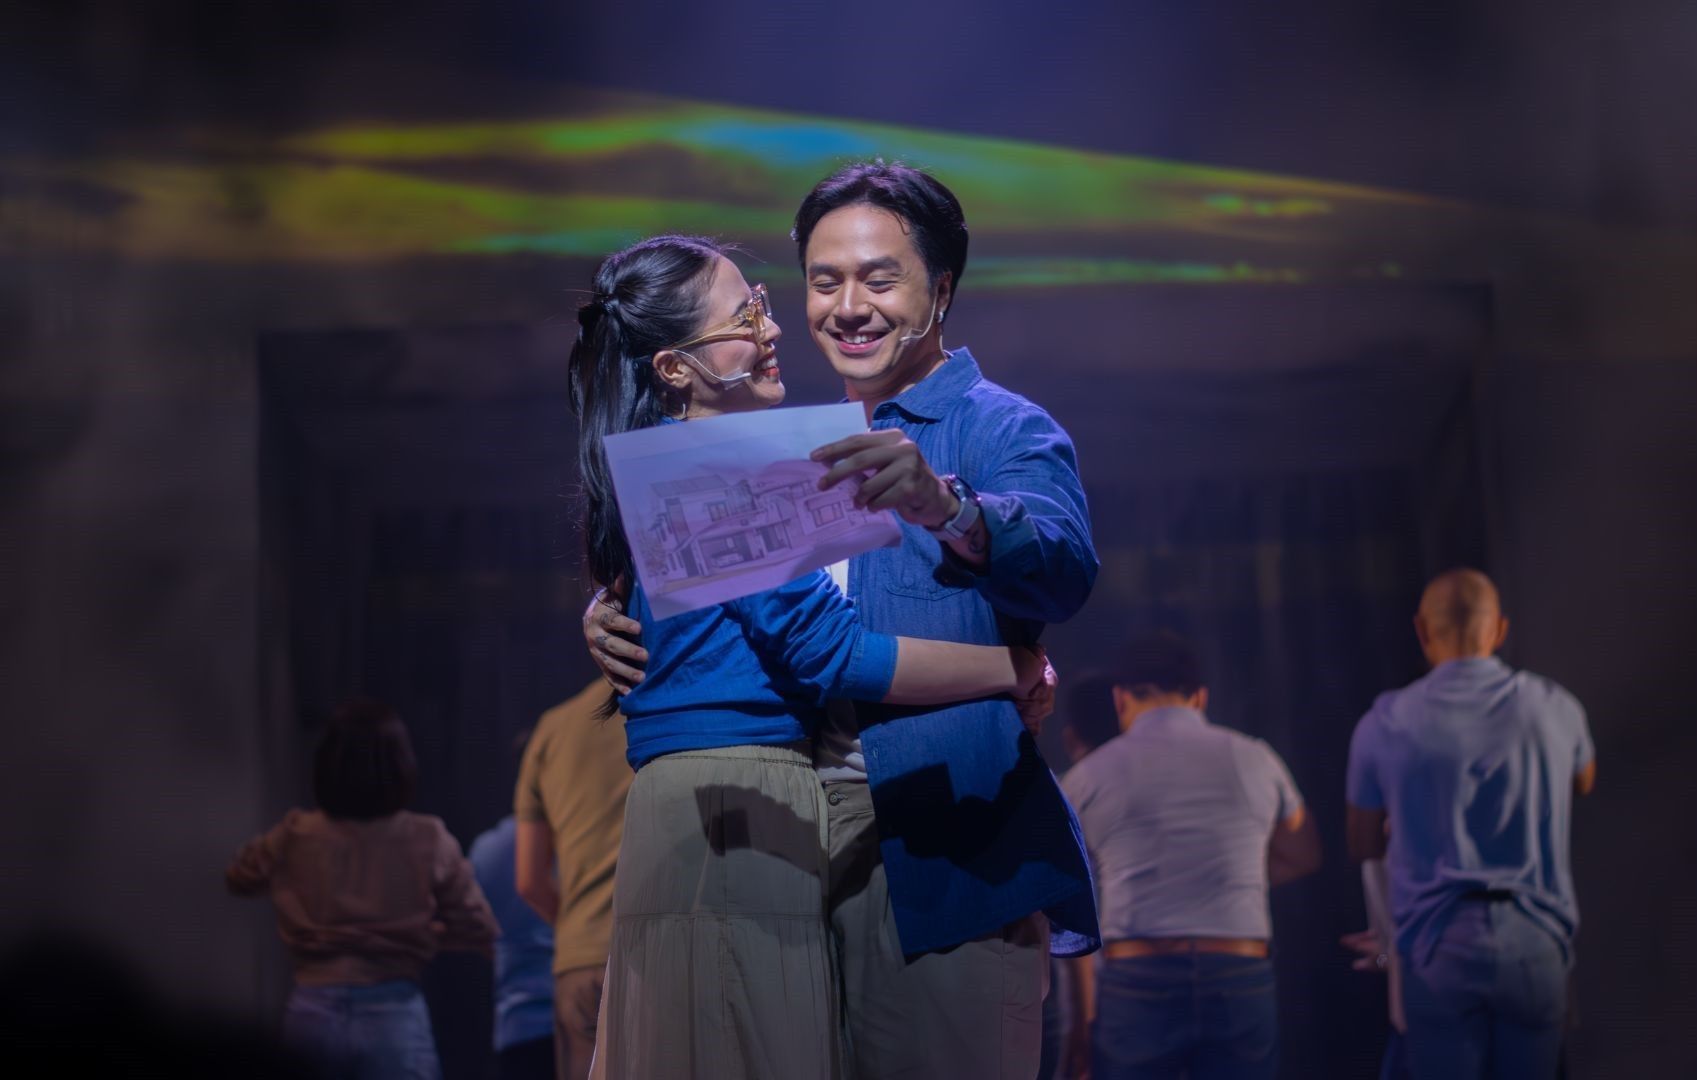 Ben&Ben songs shine in ‘One More Chance’ musical